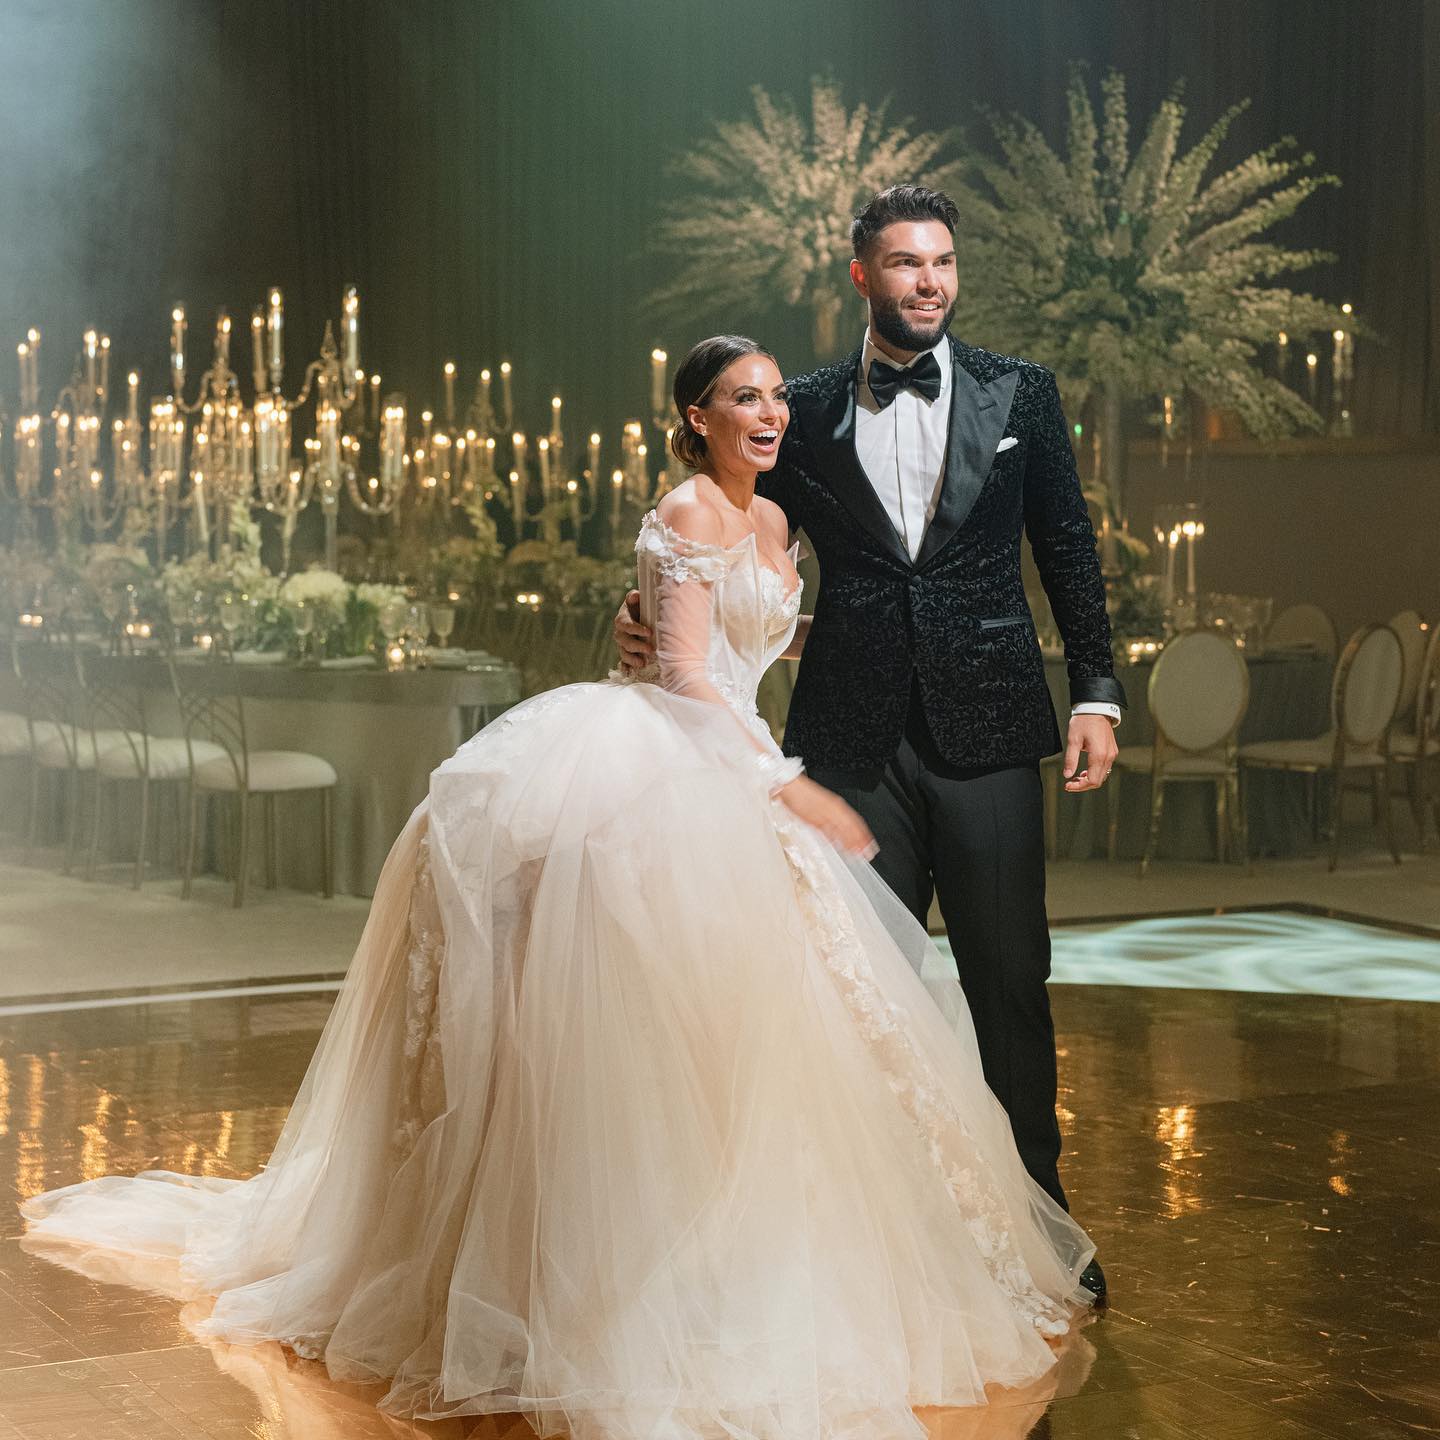 Kacie McDonnell with her husband Eric Hosmer at their wedding